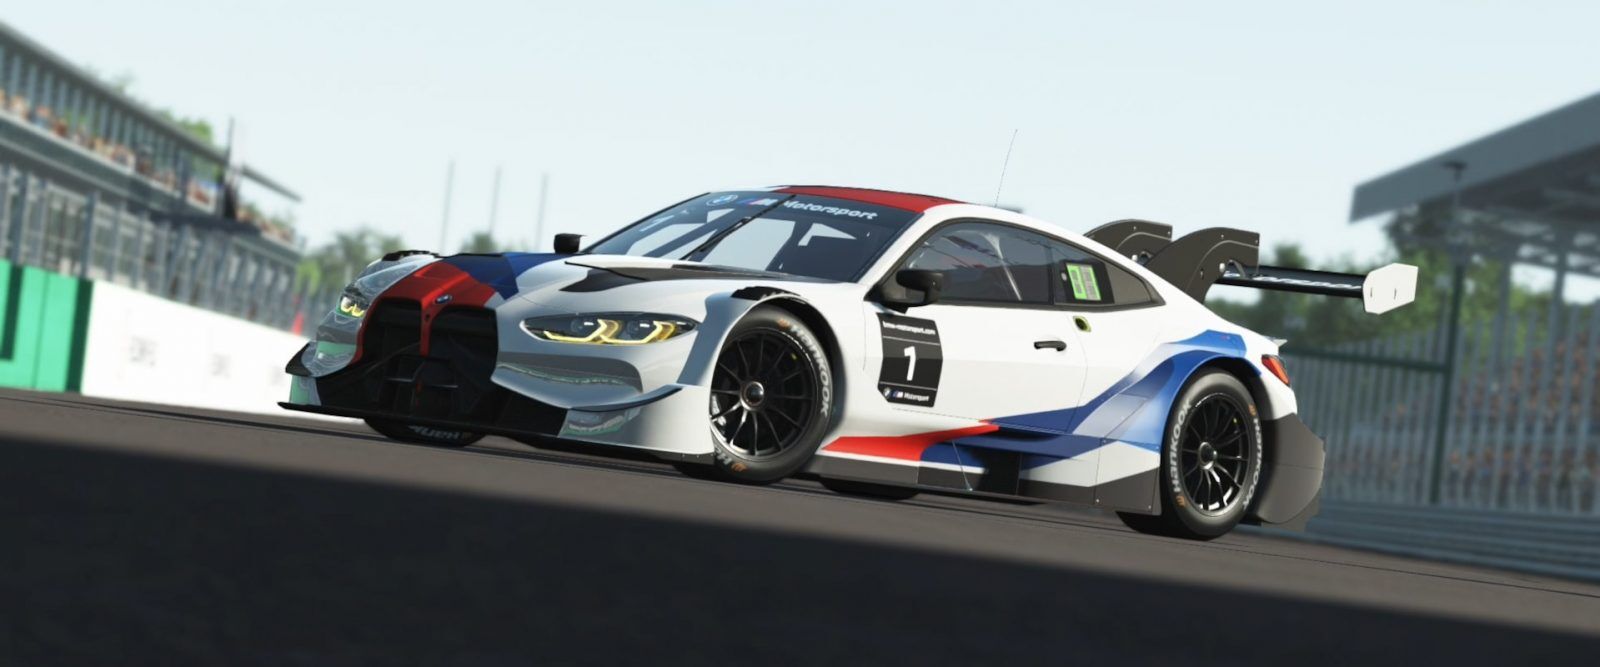 rFactor 2 to add Monza and 2 New BMW Cars